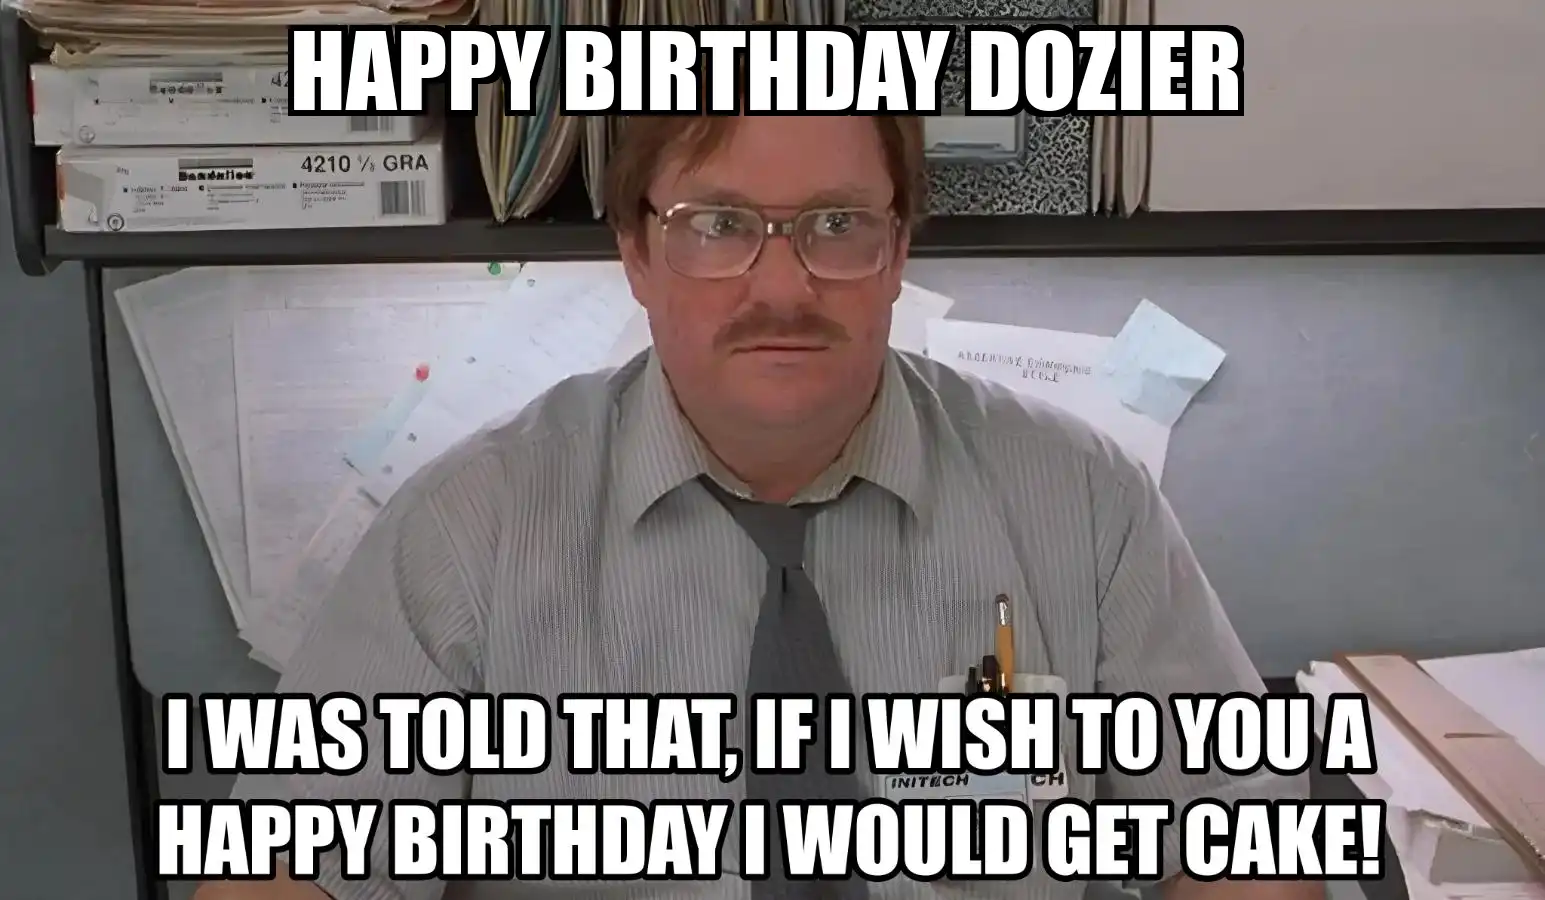 Happy Birthday Dozier I Would Get A Cake Meme